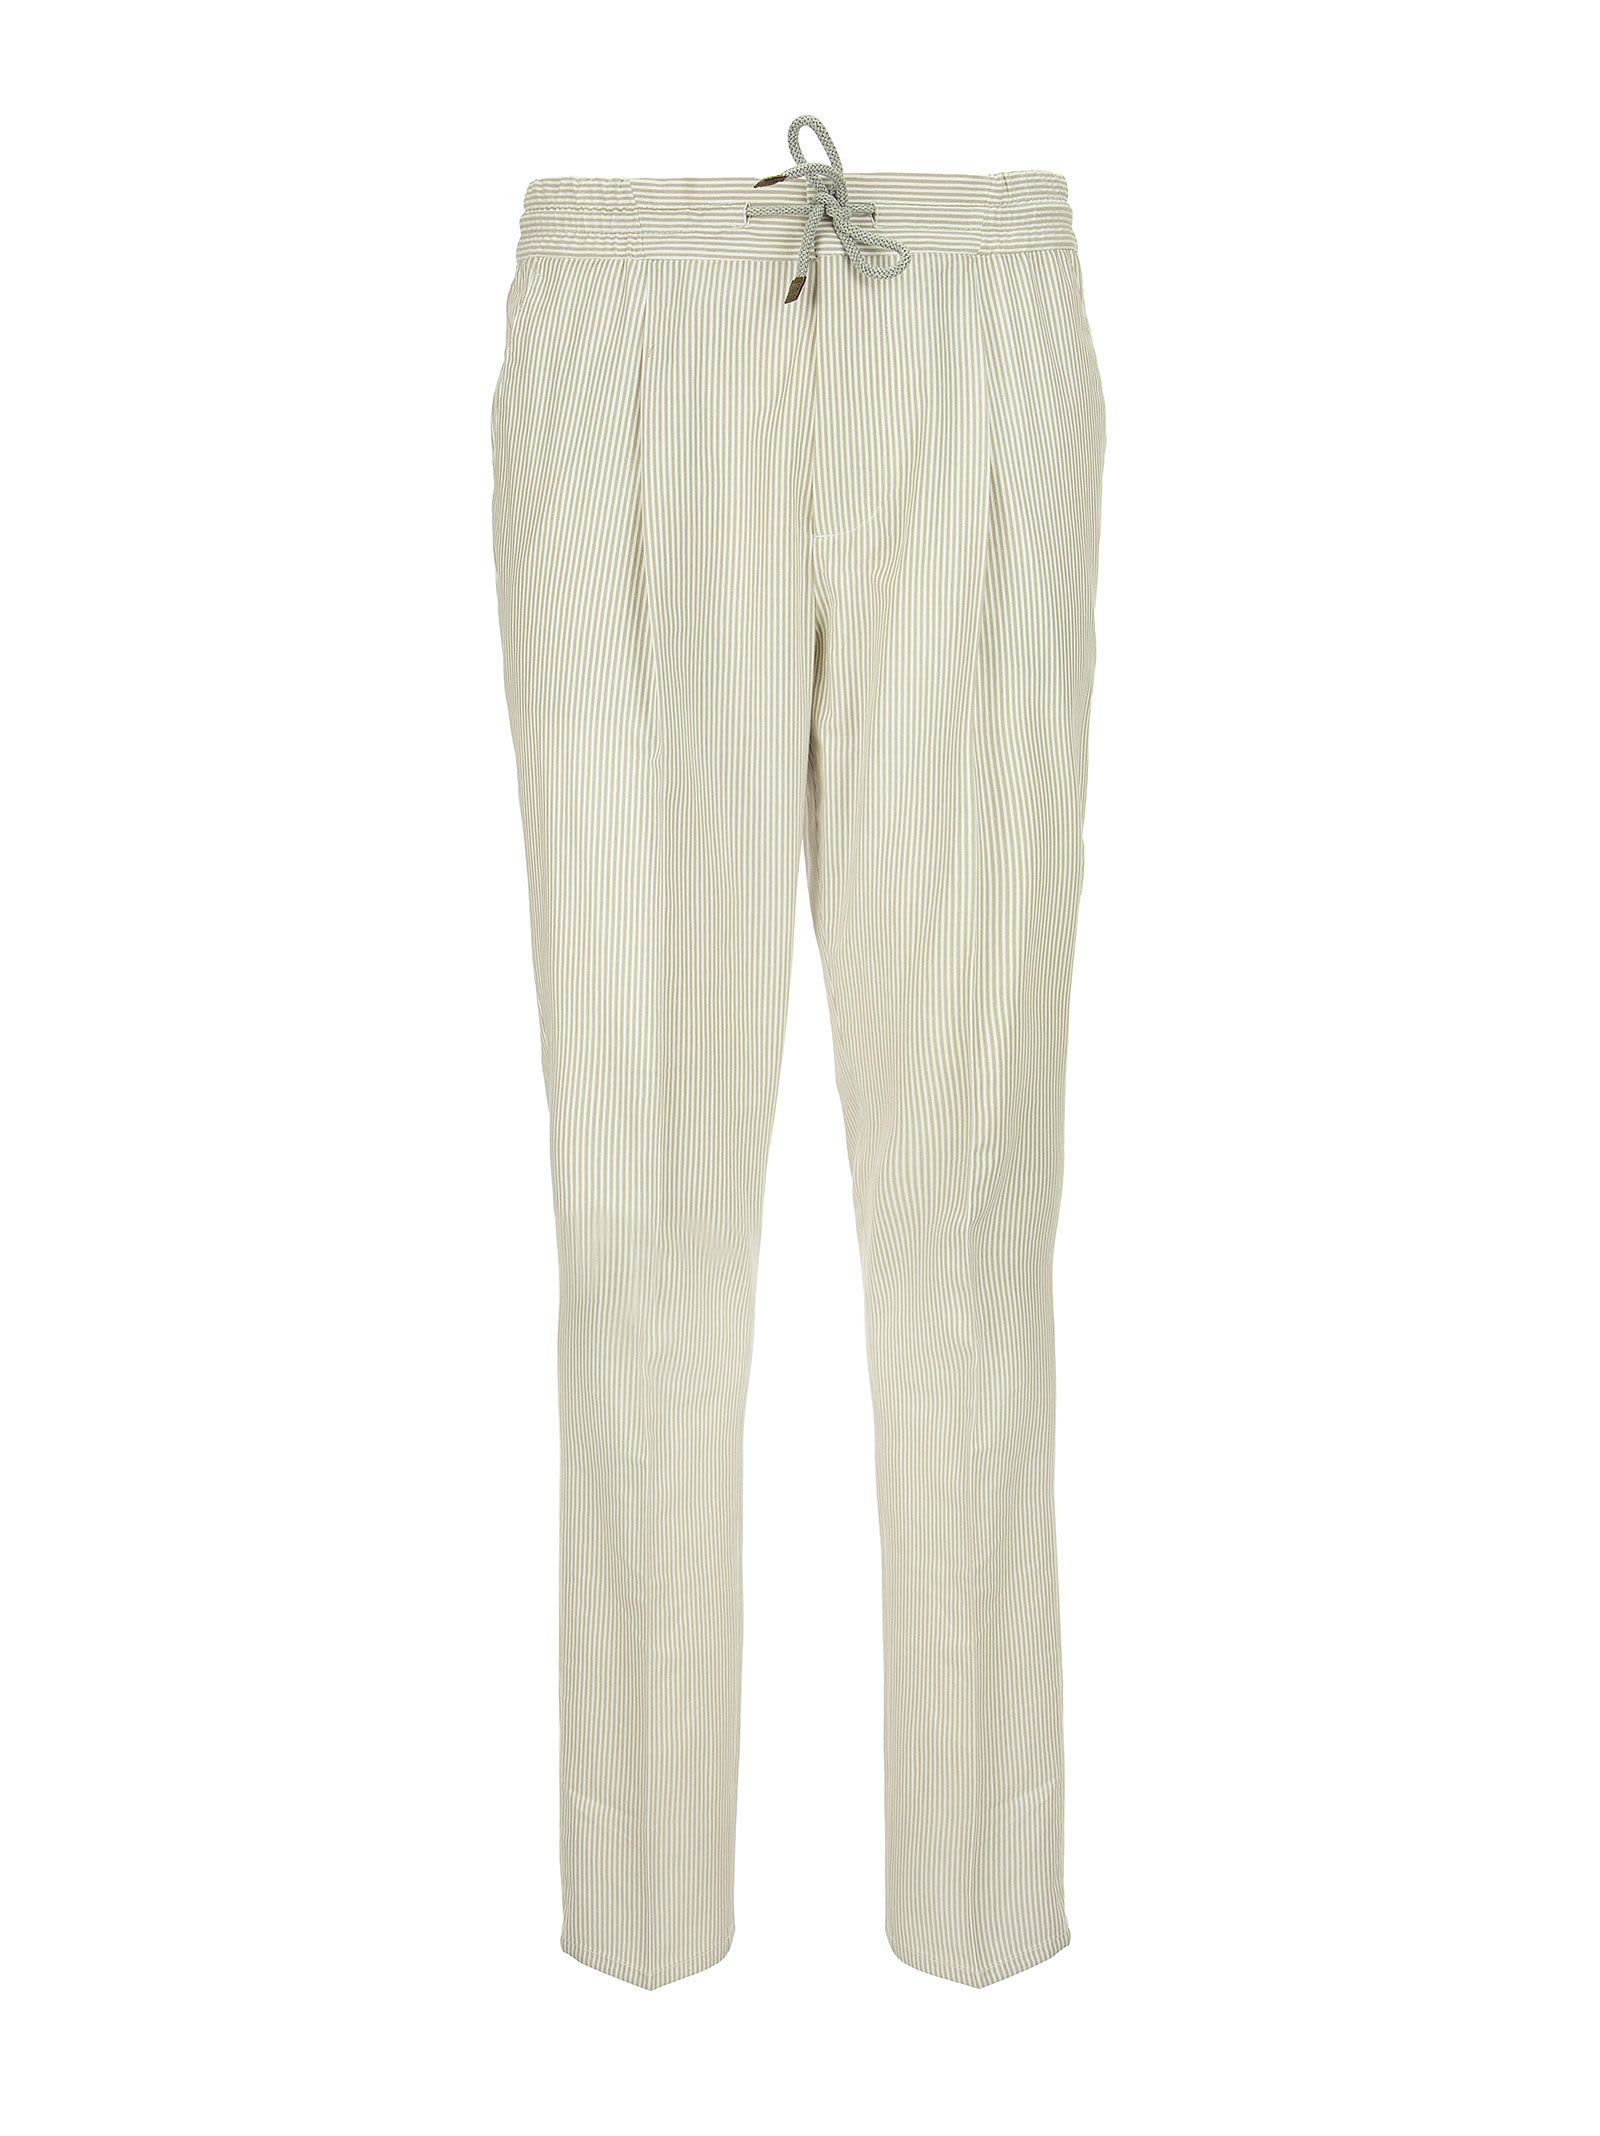 Comfort Cotton Striped Textured Fabric Leisure Fit Trousers With Drawstring And Pleat Brunello Cucinelli